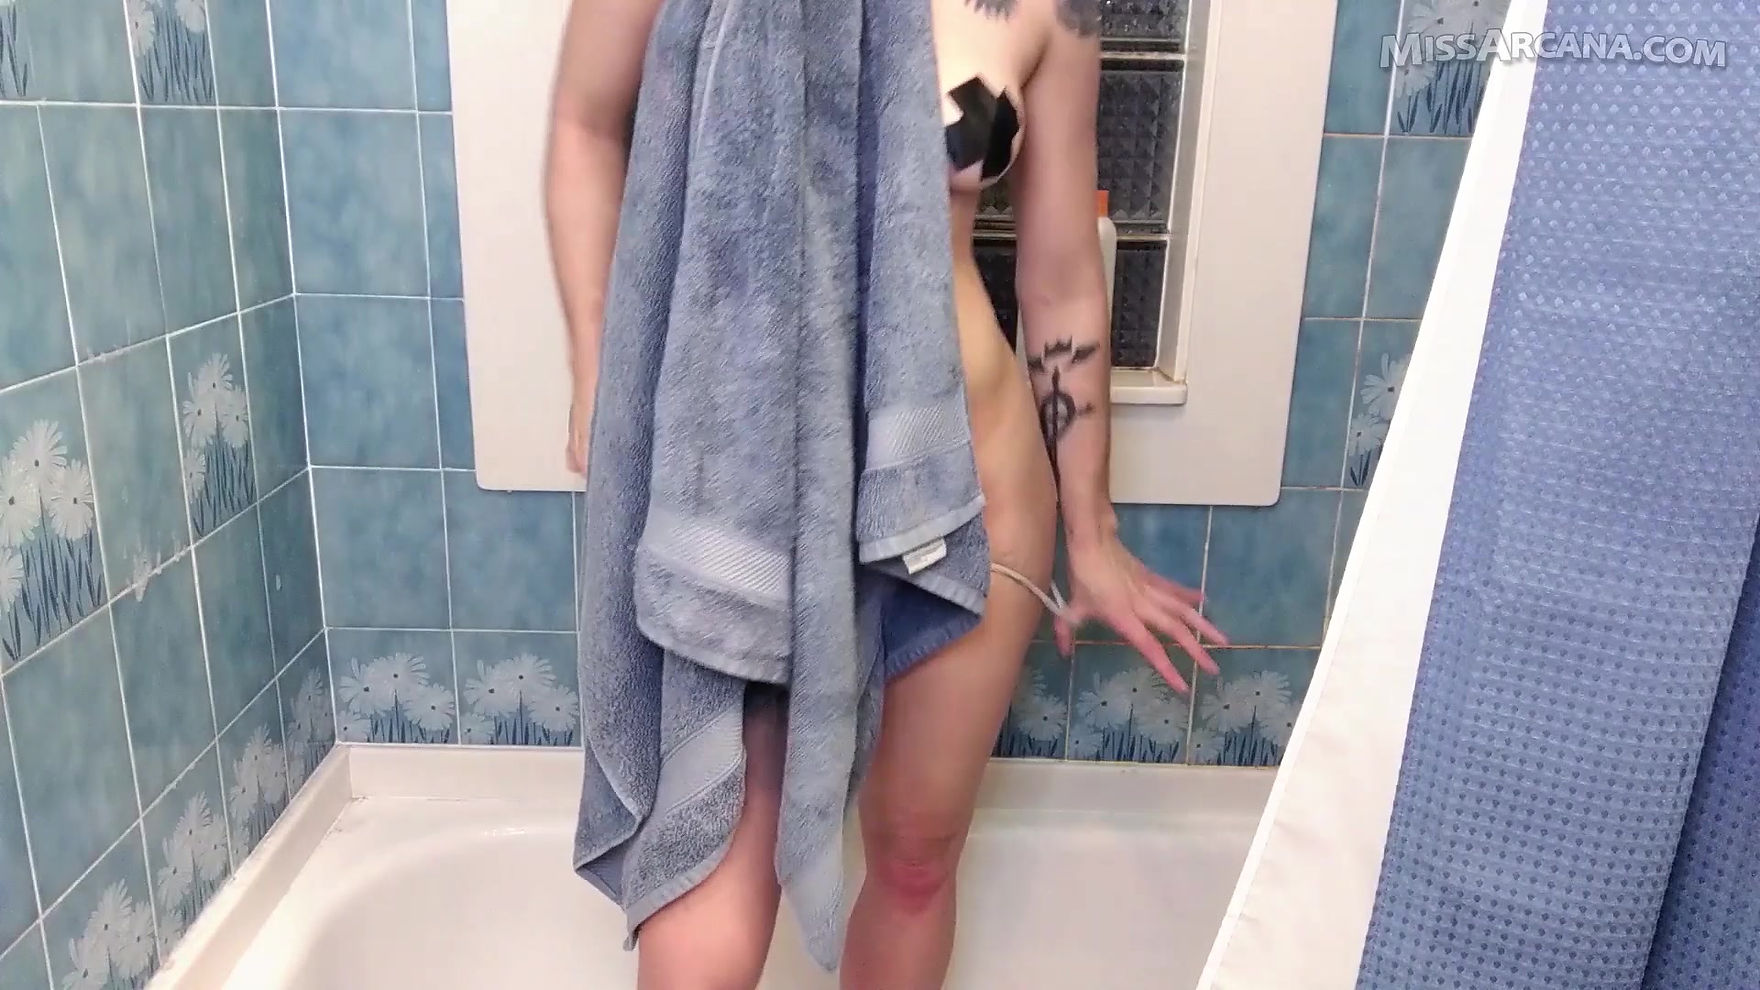 Taking a Shower